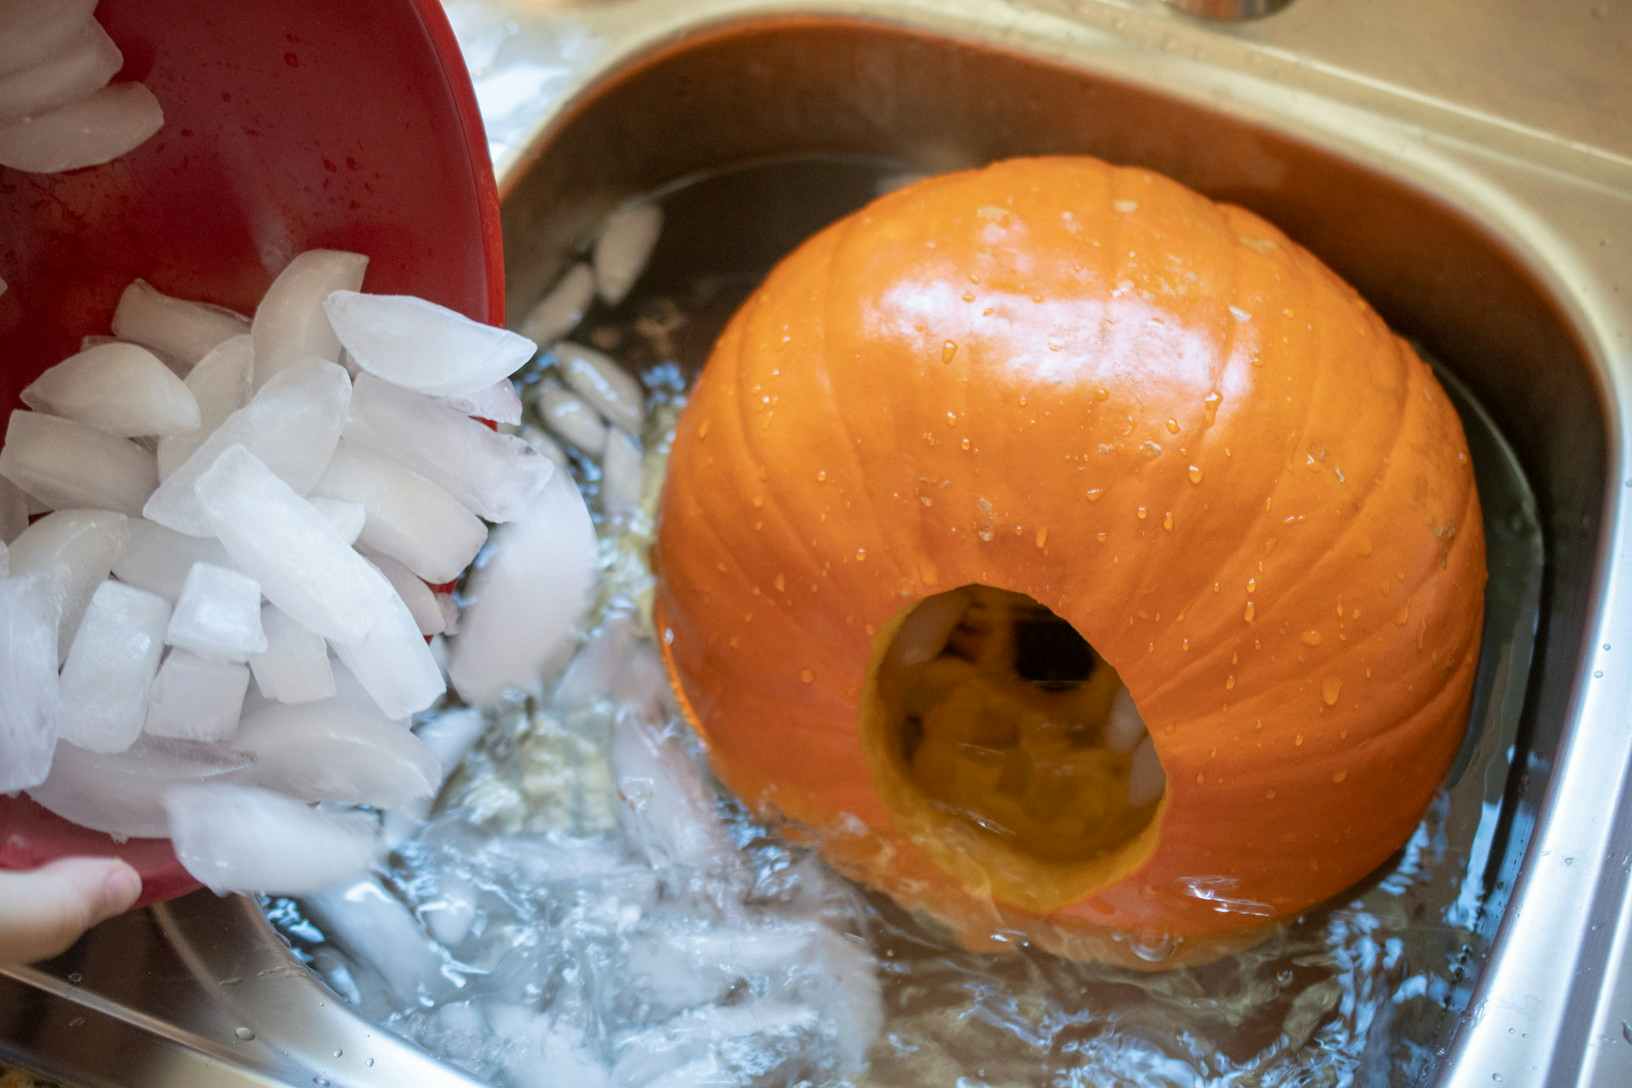 A pumpkin being placed in a sink full of ice